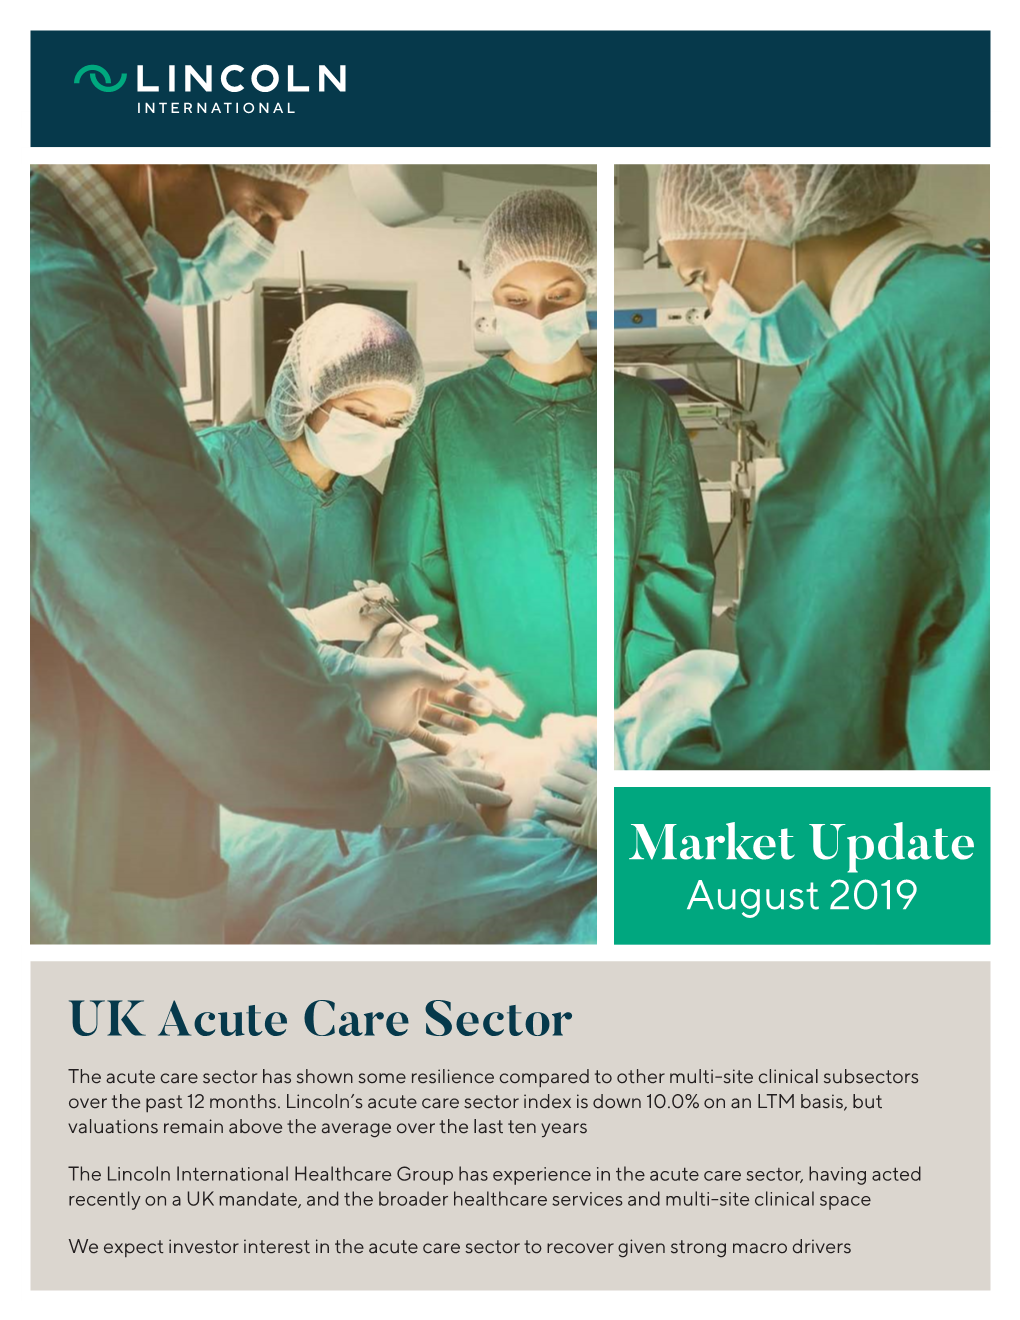 UK Acute Care Sector Market Update August 2019